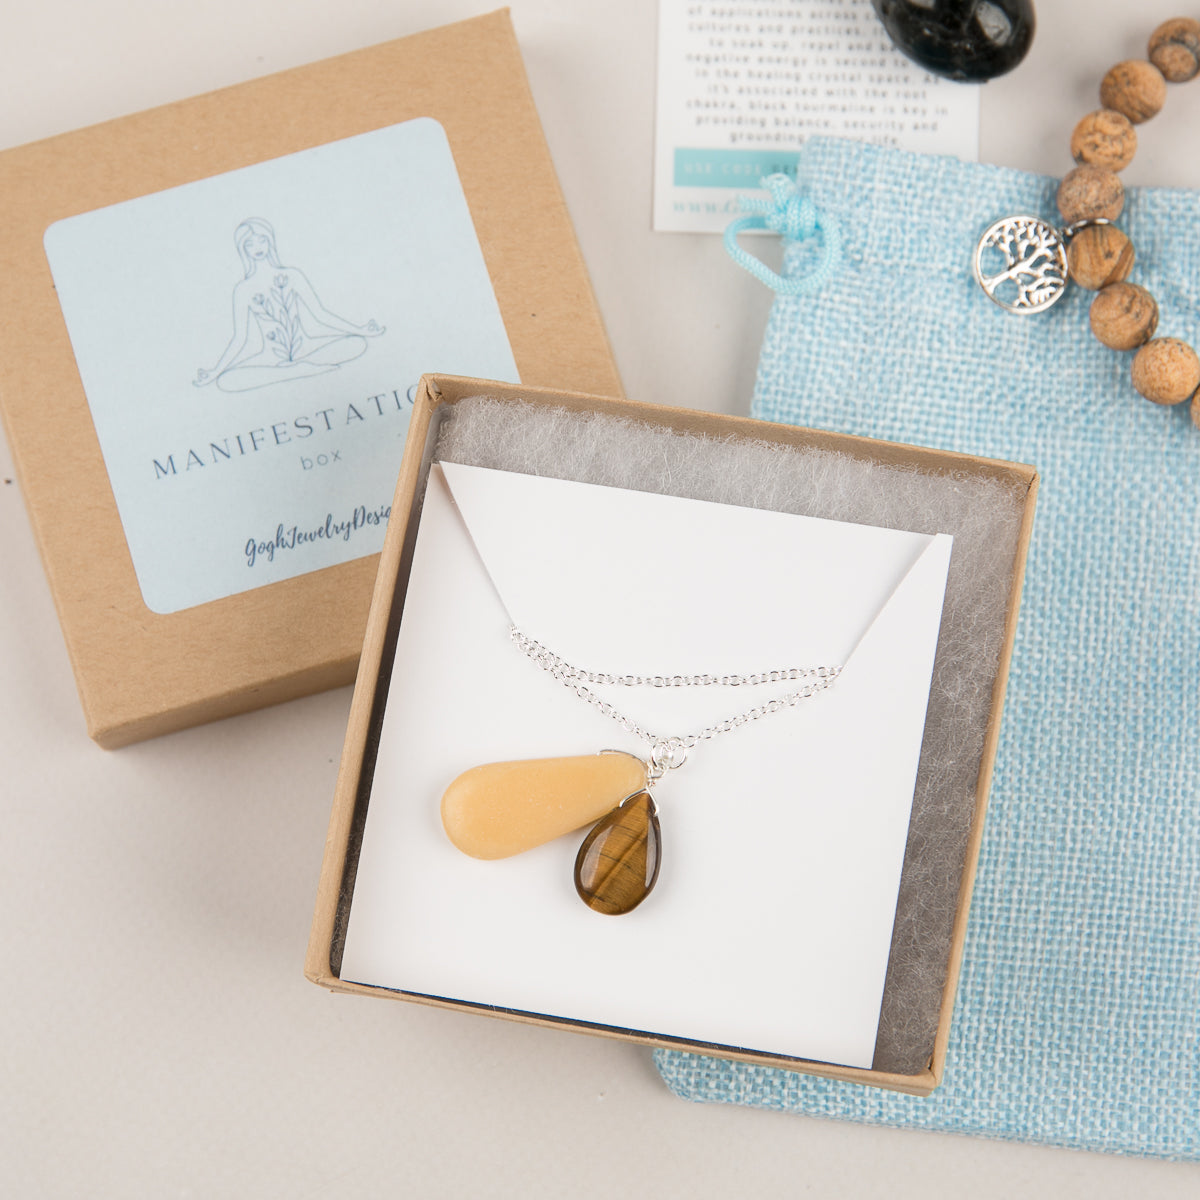  I prepared you tools in the form of meditations and gemstones to help set your intentions to practice Forgiveness (Forgiving others and yourself) as part of your Manifestation Box from Gogh Jewelry Design. 